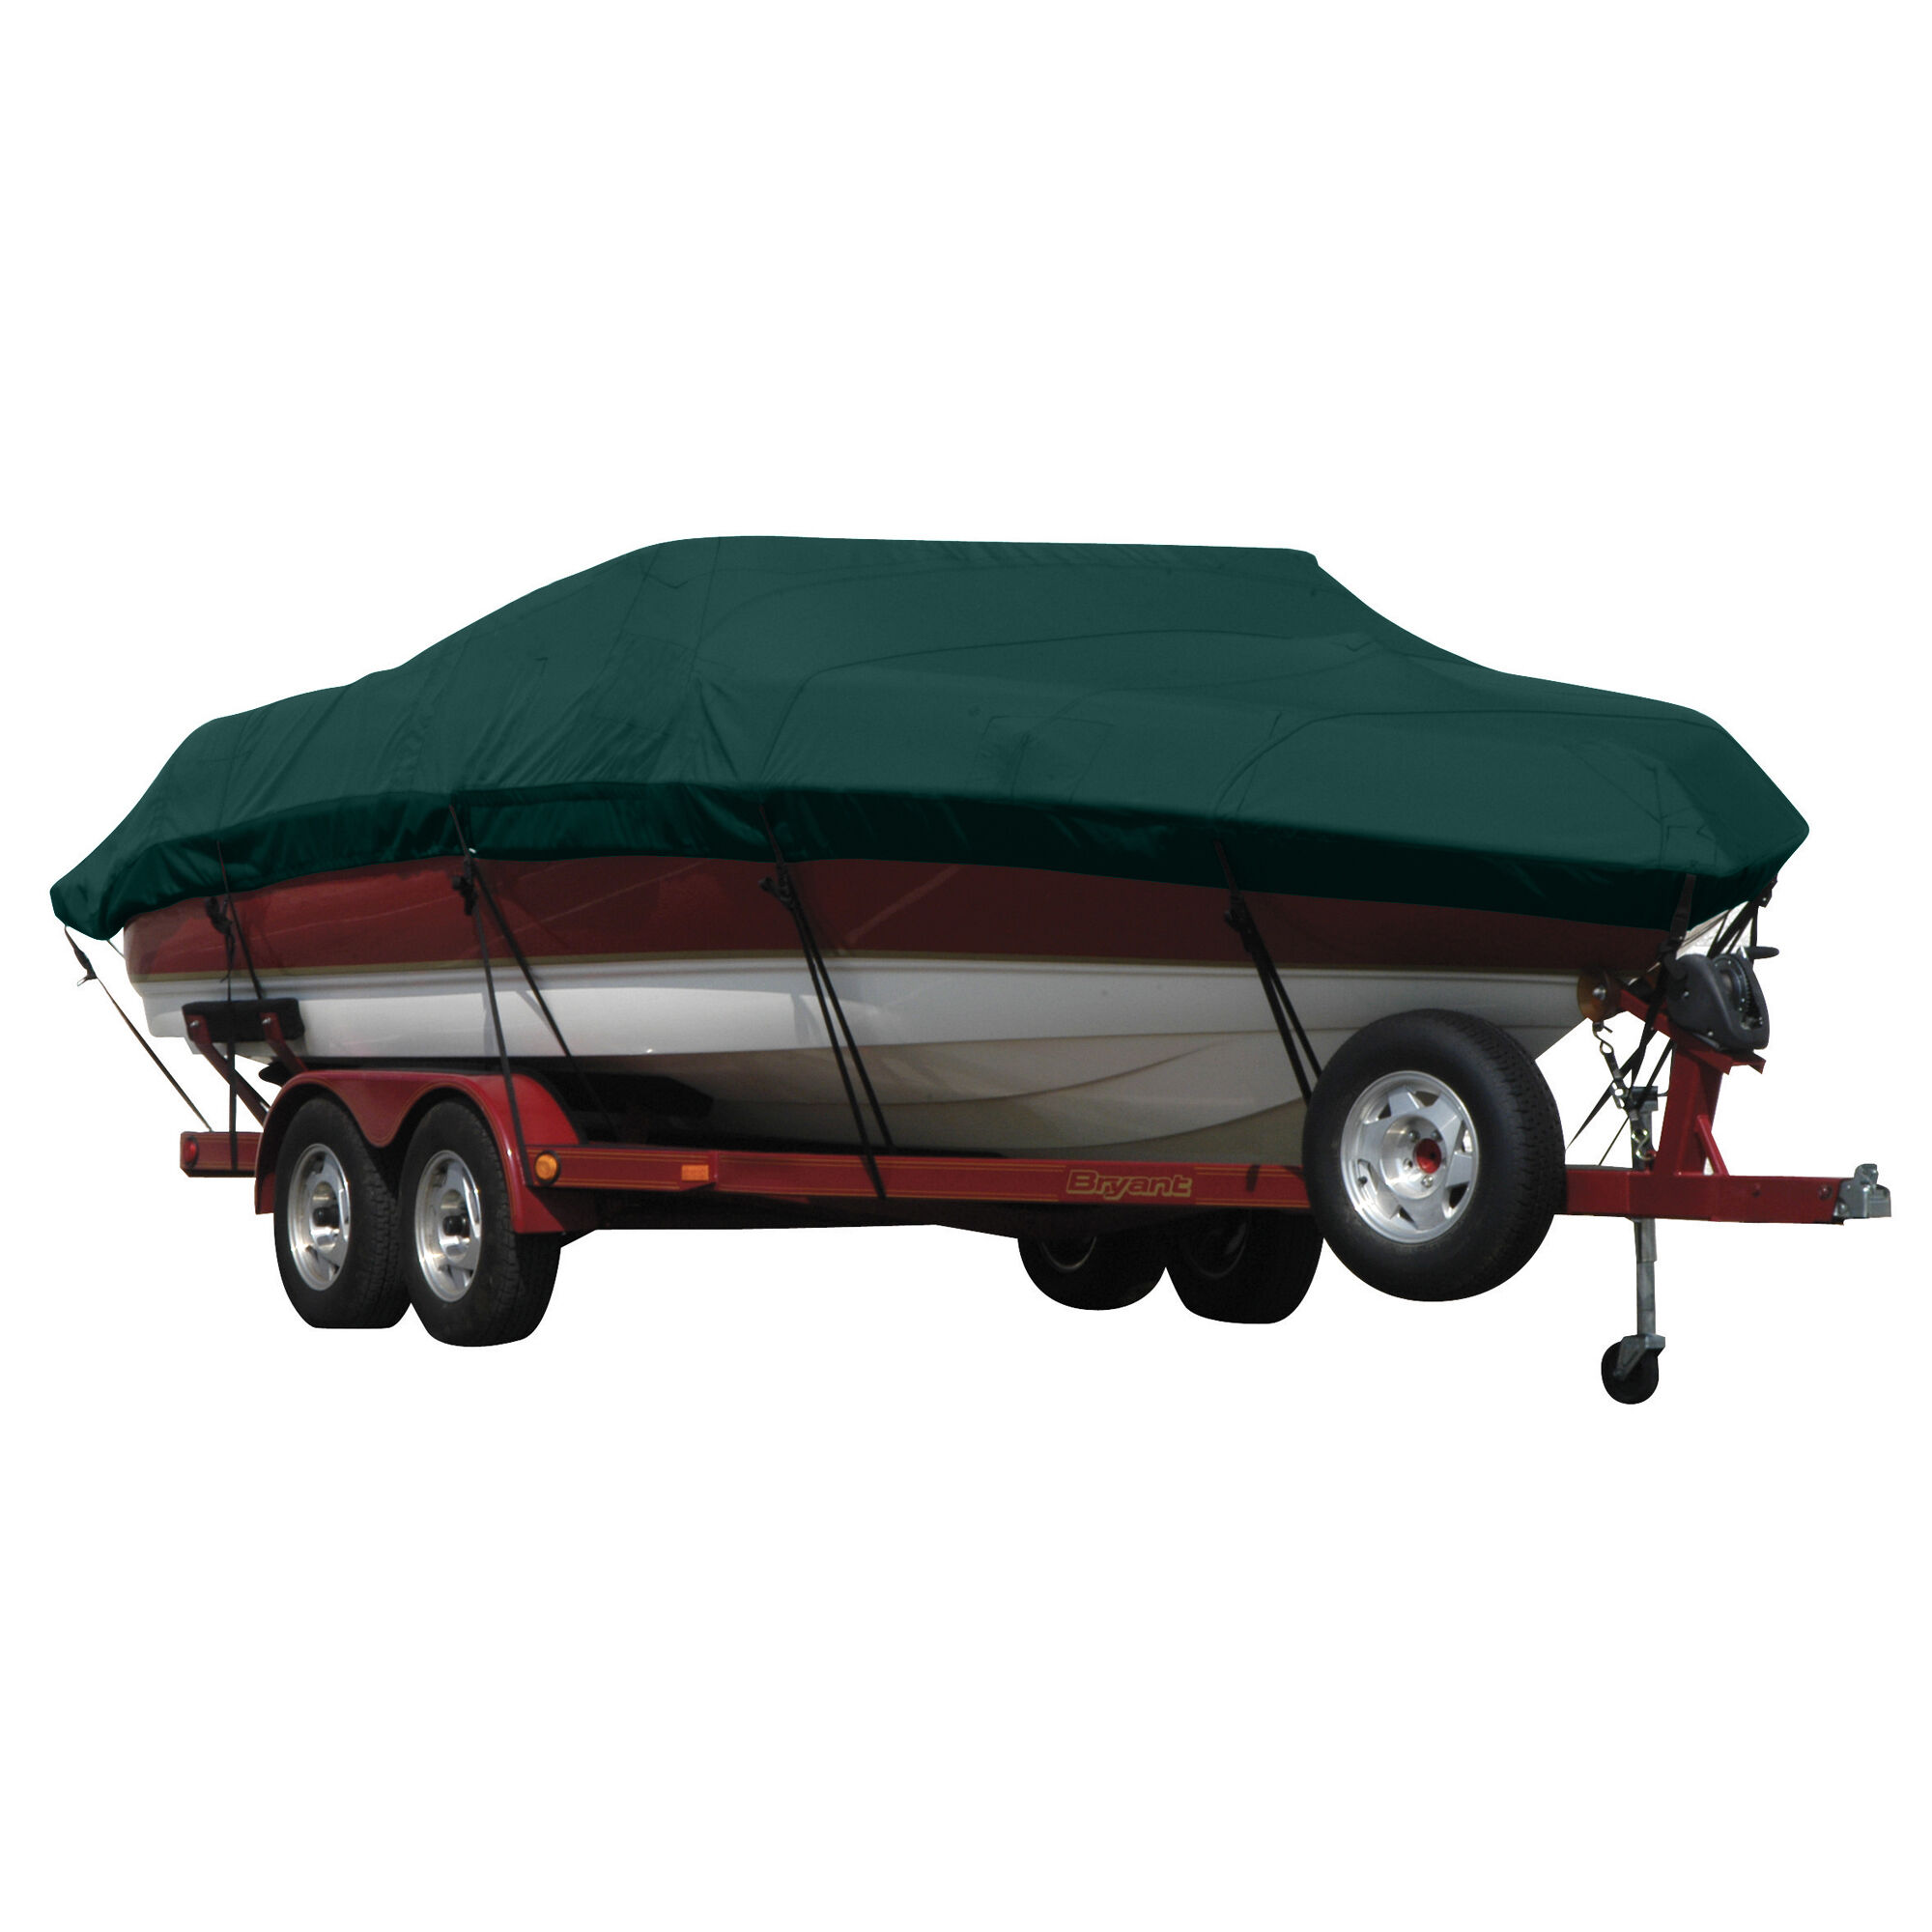 Covermate Exact Fit Sunbrella Boat Cover for Four Winns Horizon 220 Ss Horizon 220 Ss w/ Plexy Glass Windshield I/O. Forest Green